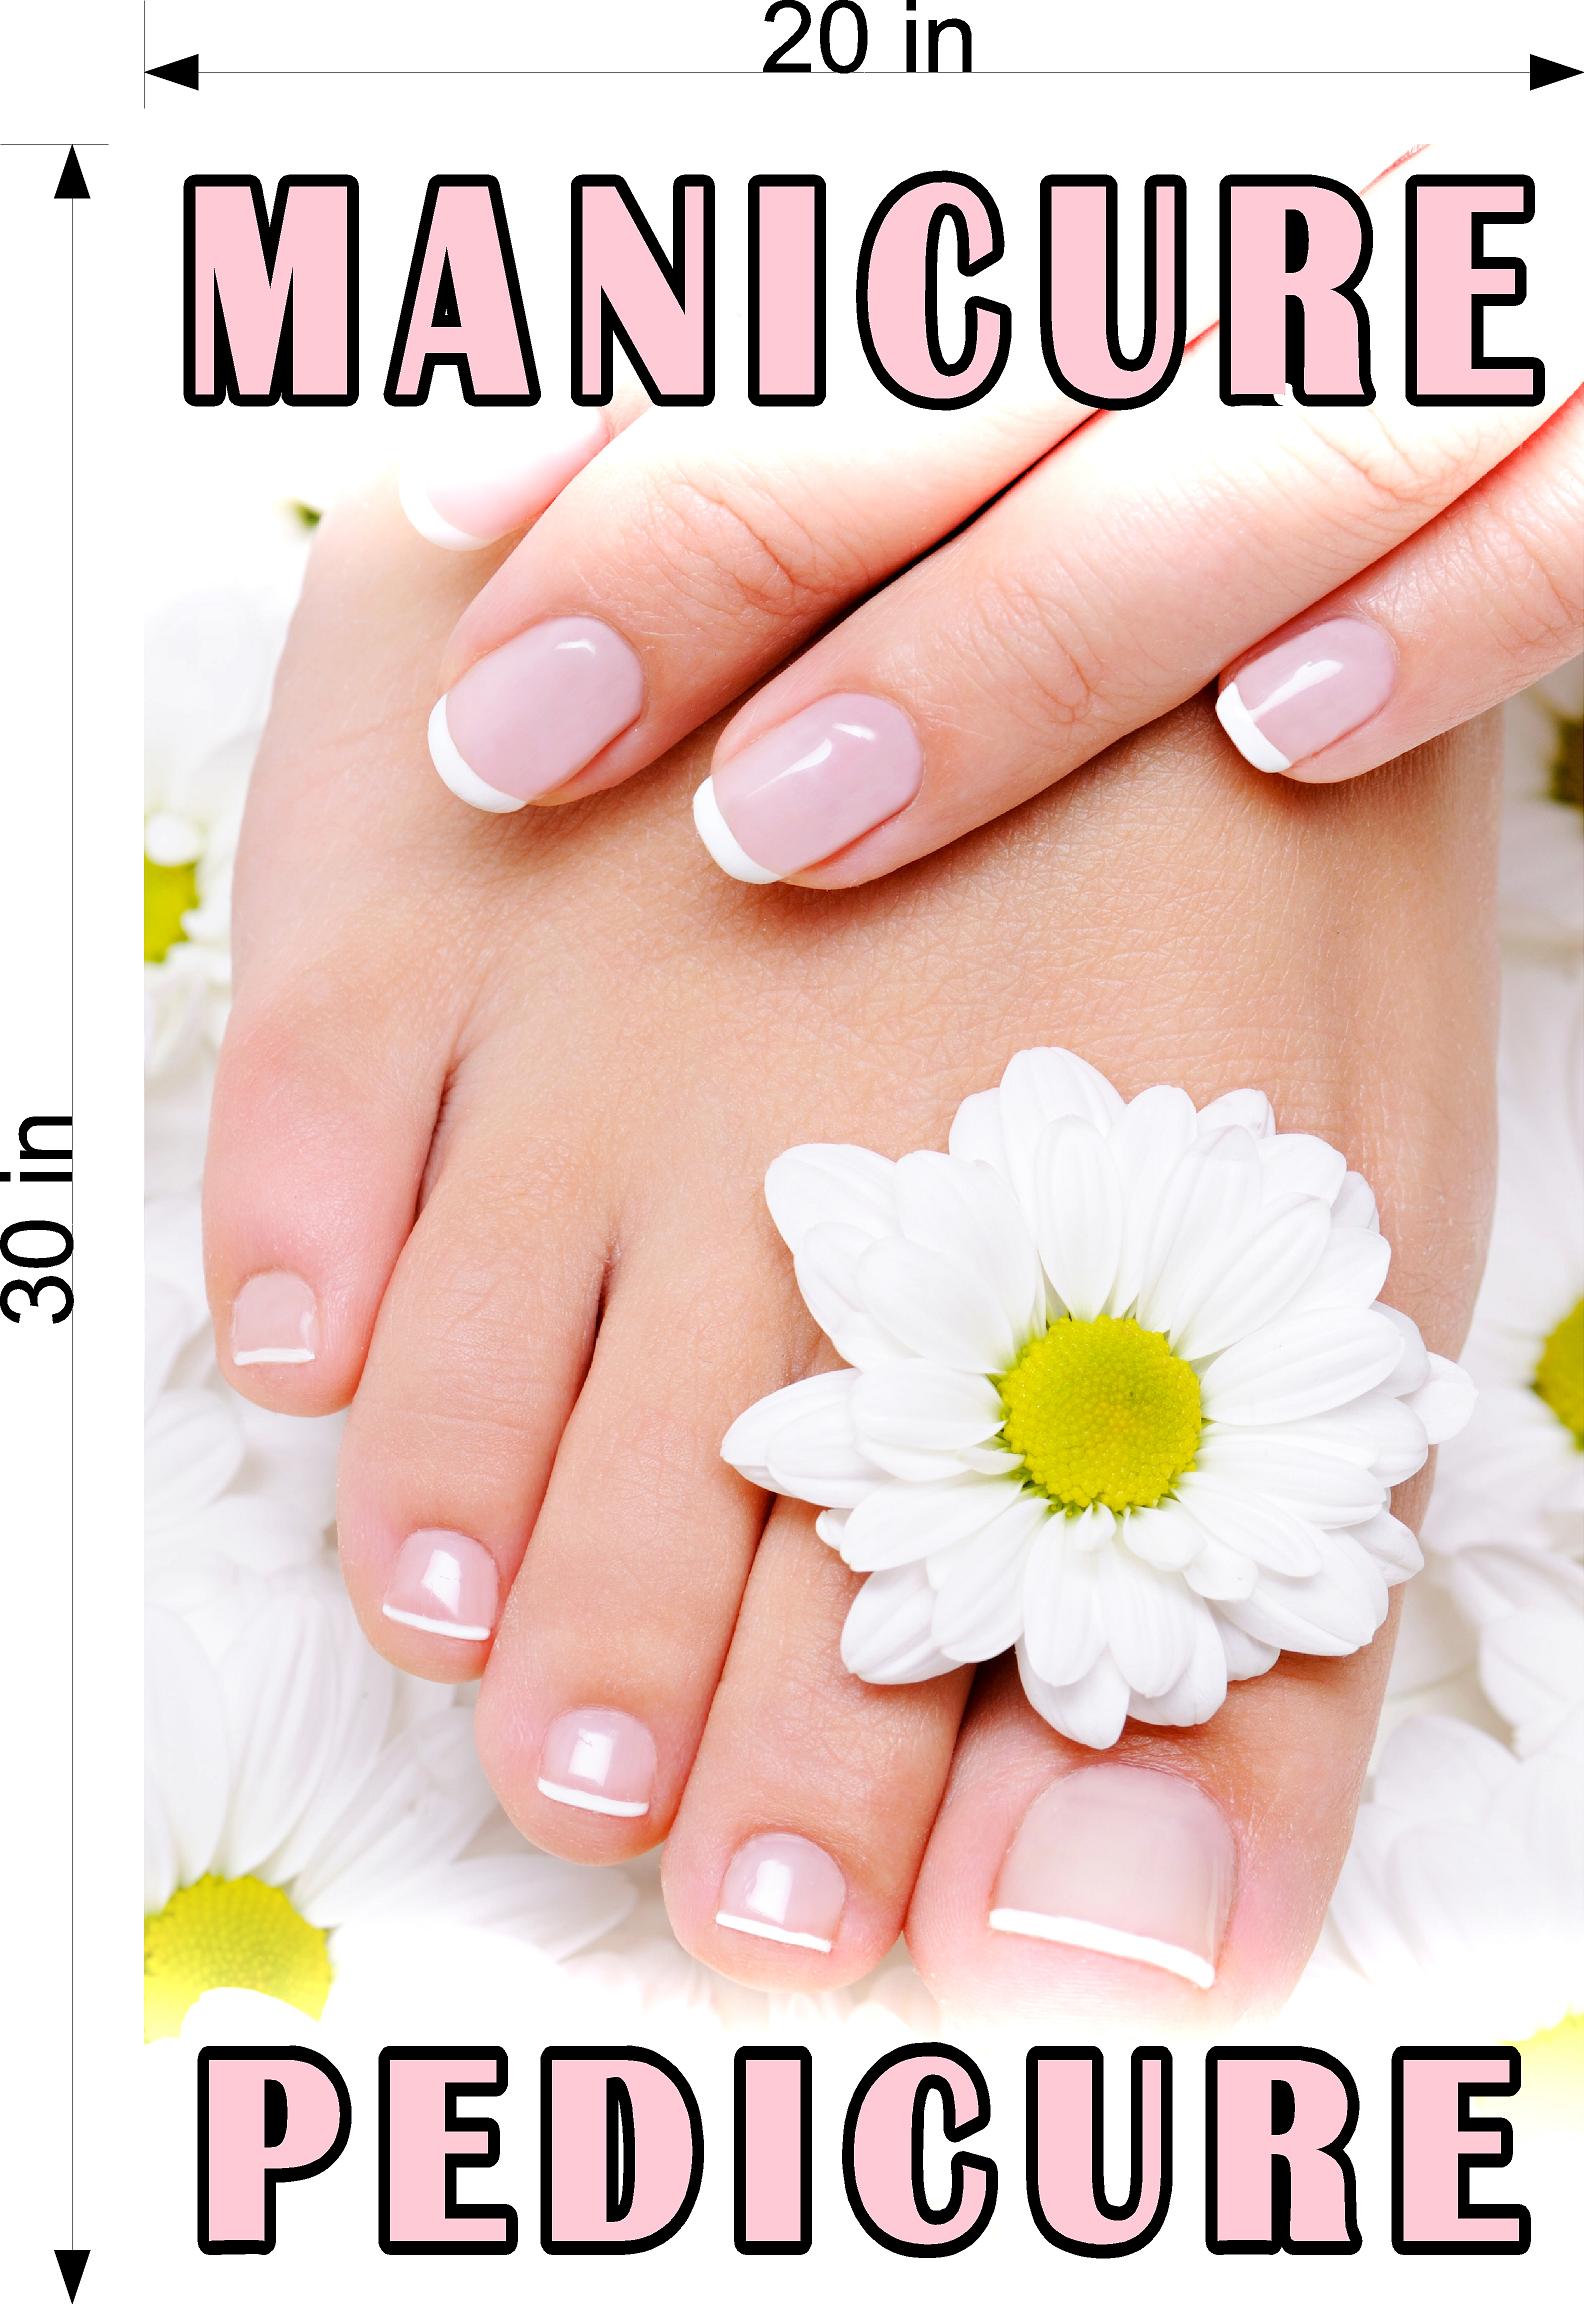 Pedicure & Manicure 15 Perforated Mesh One Way Vision Window Vinyl Nail Salon See Through Sign Vertical